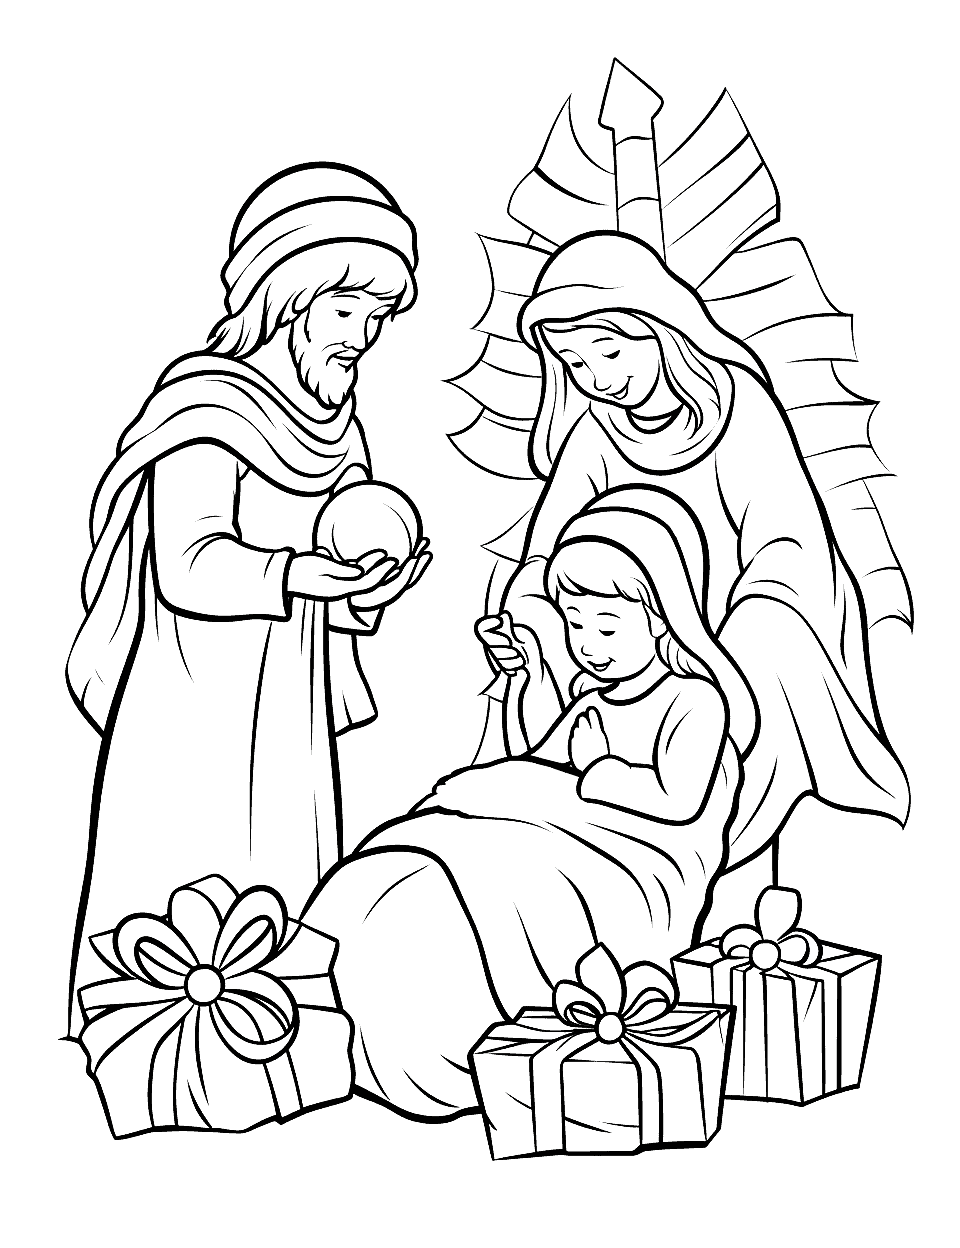 Nativity Scene Christmas Coloring Page - A coloring page depicting a classic nativity scene.